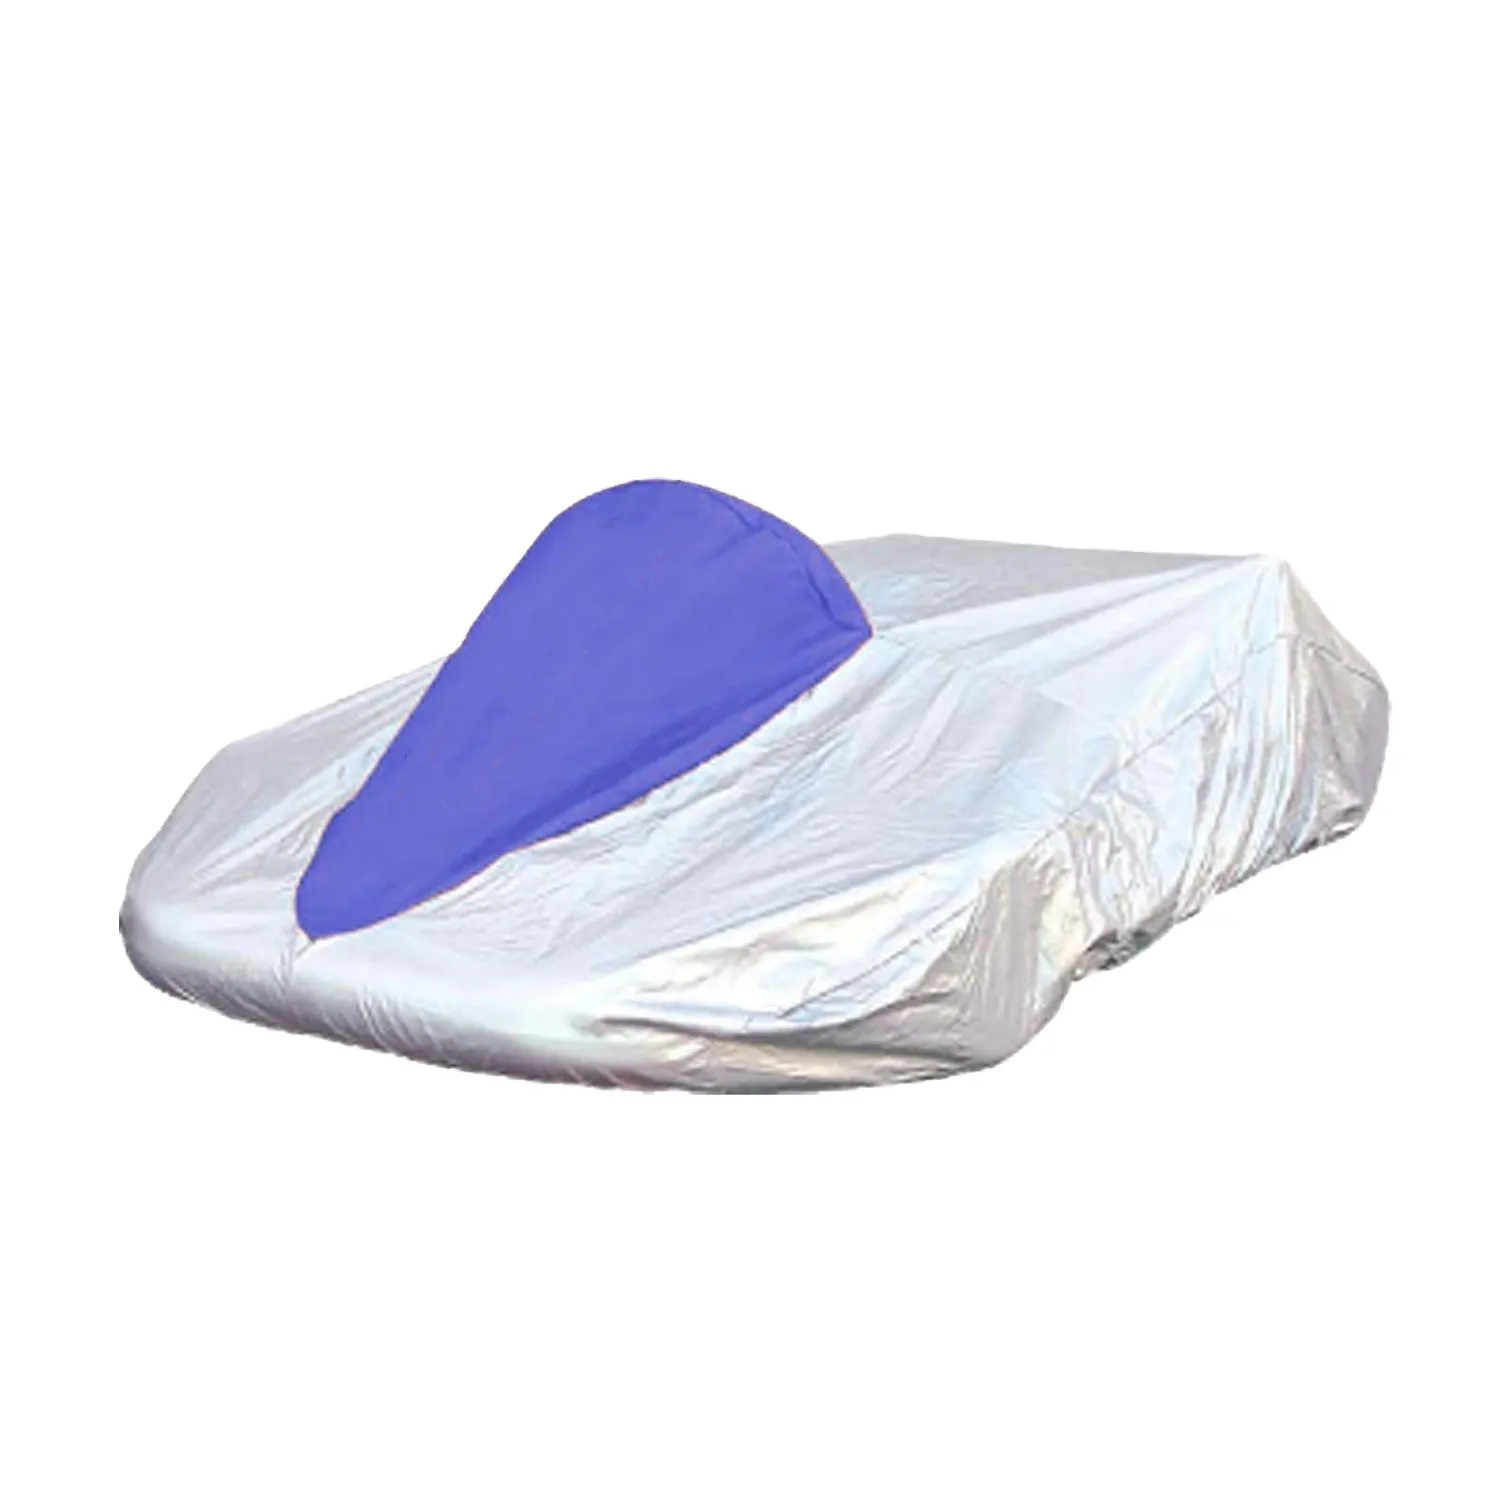 Hot Sale Customized Auto Body Cover Battery powered Electrical Smart Car Cover for Sunshine Wholesale Go Cart Covers